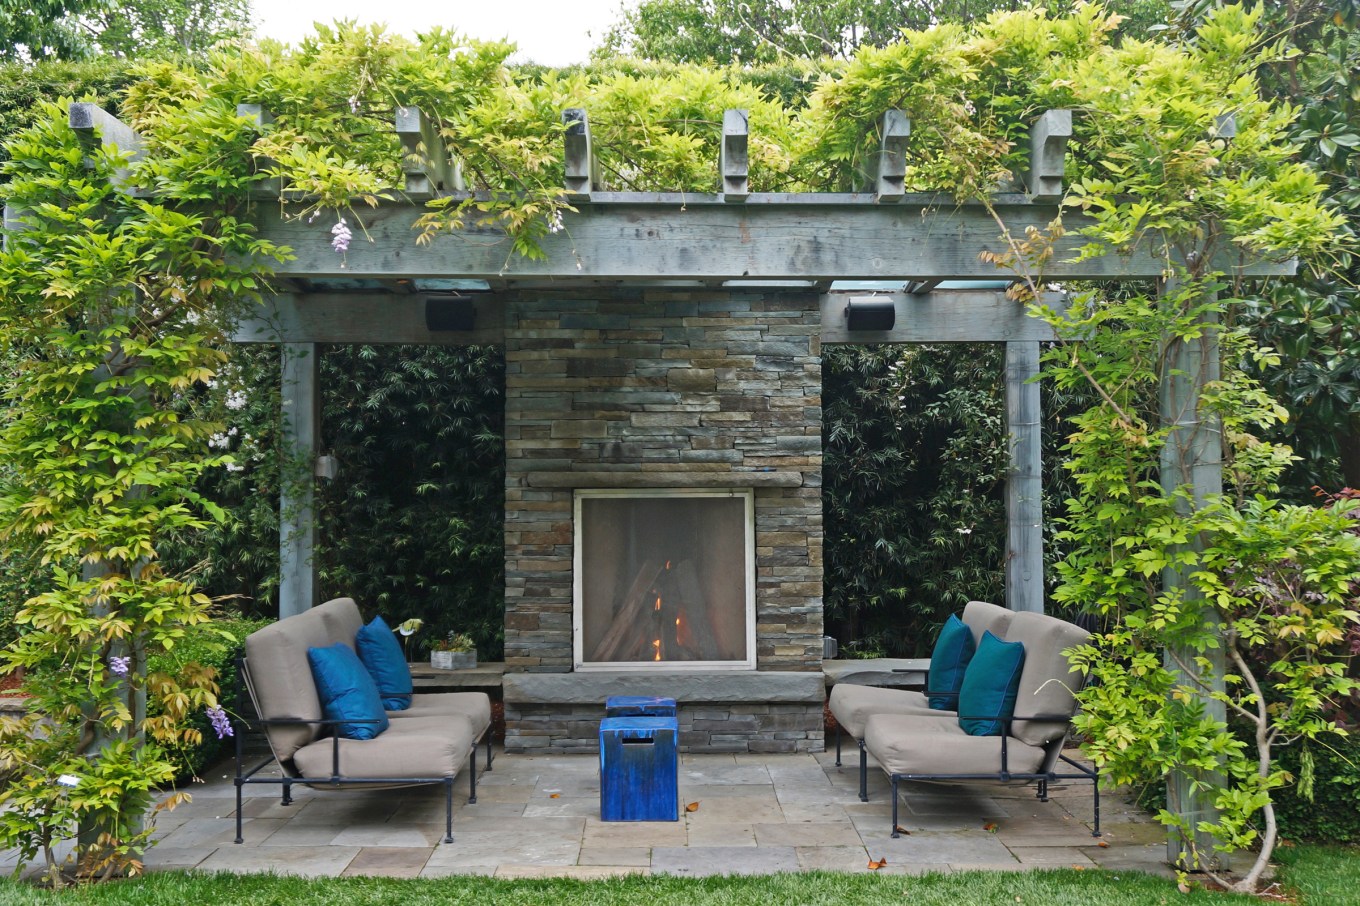 A customized outdoor fireplace with plants growing around it and seating for a few people.